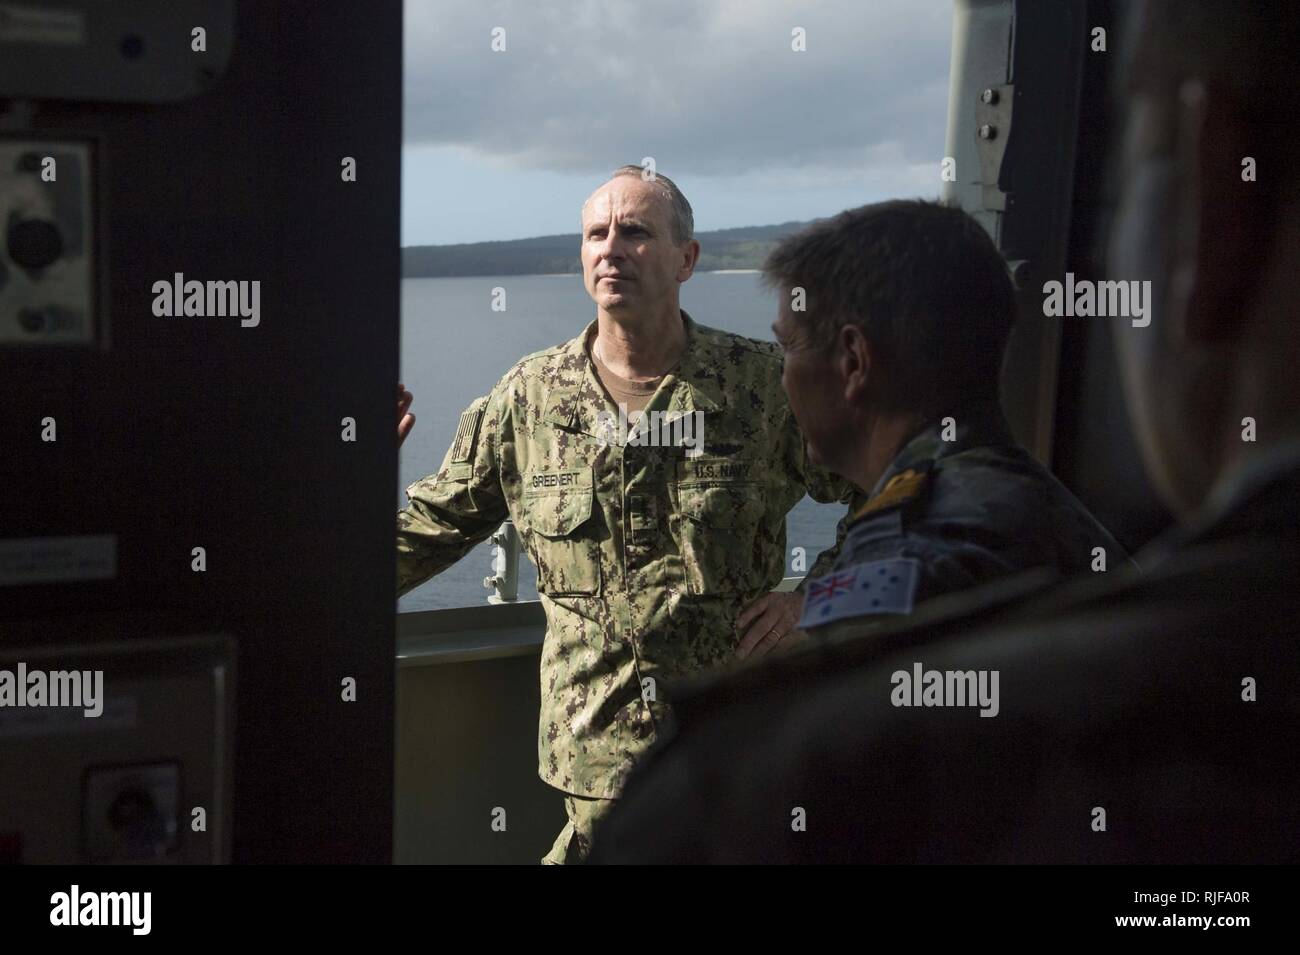 CANBERRA, Australia (Feb. 11, 2015) Chief of Naval Operations (CNO) Adm. Jonathan Greenert looks analyzes the layout and structure of the pilot house of the Canberra-class landing helicopter dock HMAS Canberra (LHD 2) during a tour of the ship. Canberra, commissioned in November 2014, will provide the Australian Defence Force (ADF) with one of the most capable and sophisticated air-land-sea amphibious deployment systems in the world once fully certified for deployment. Stock Photo